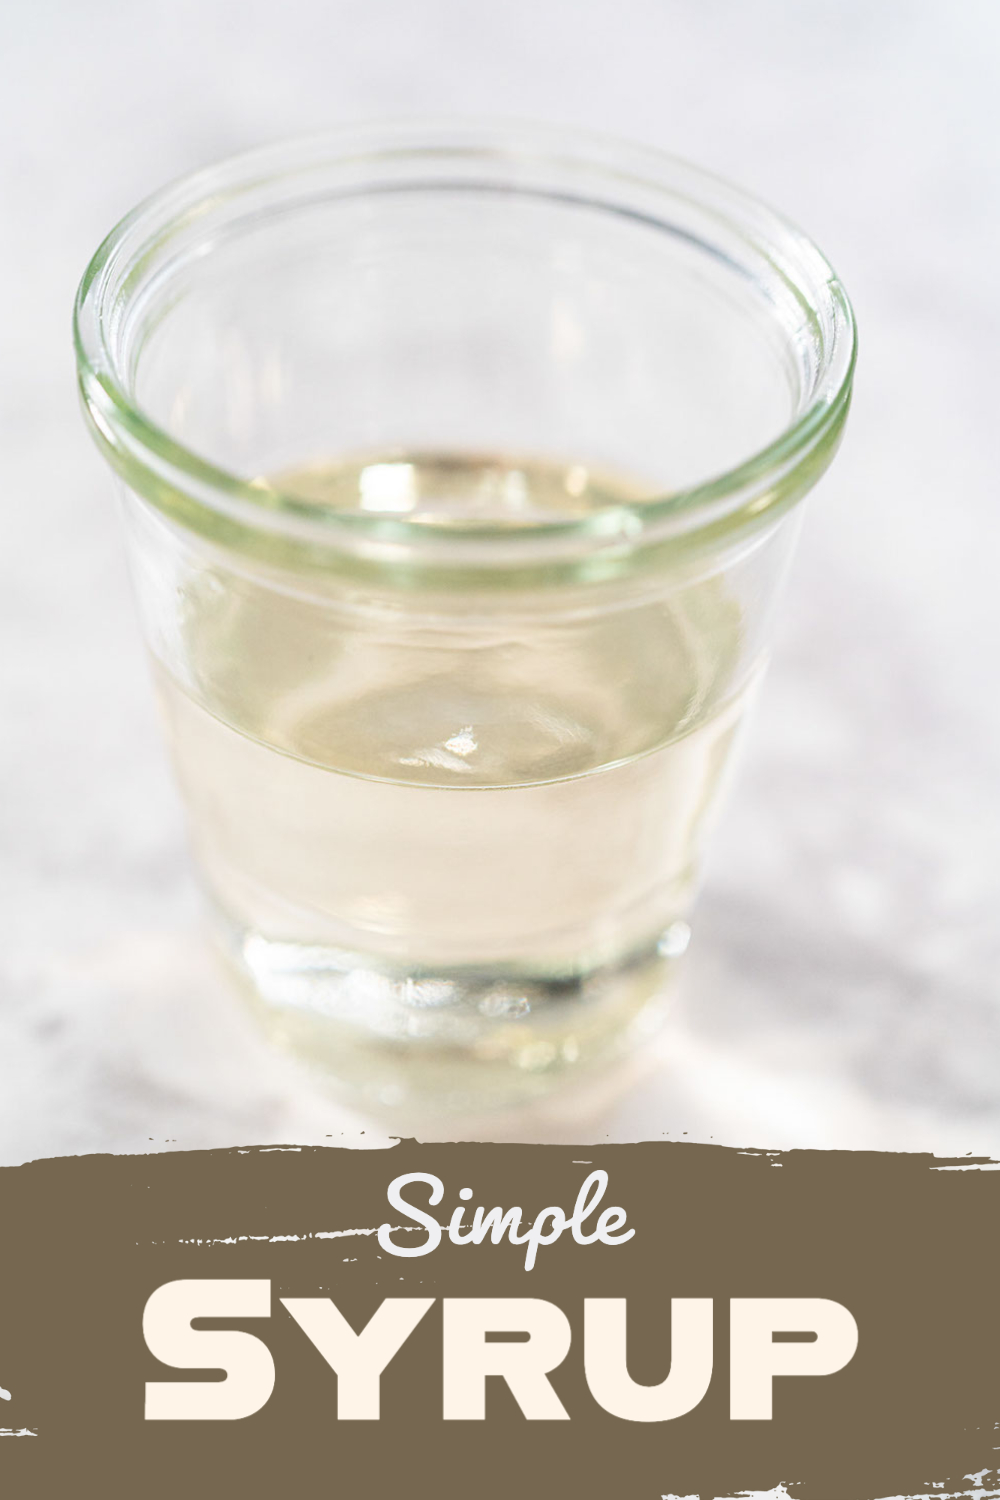 Simple Syrup